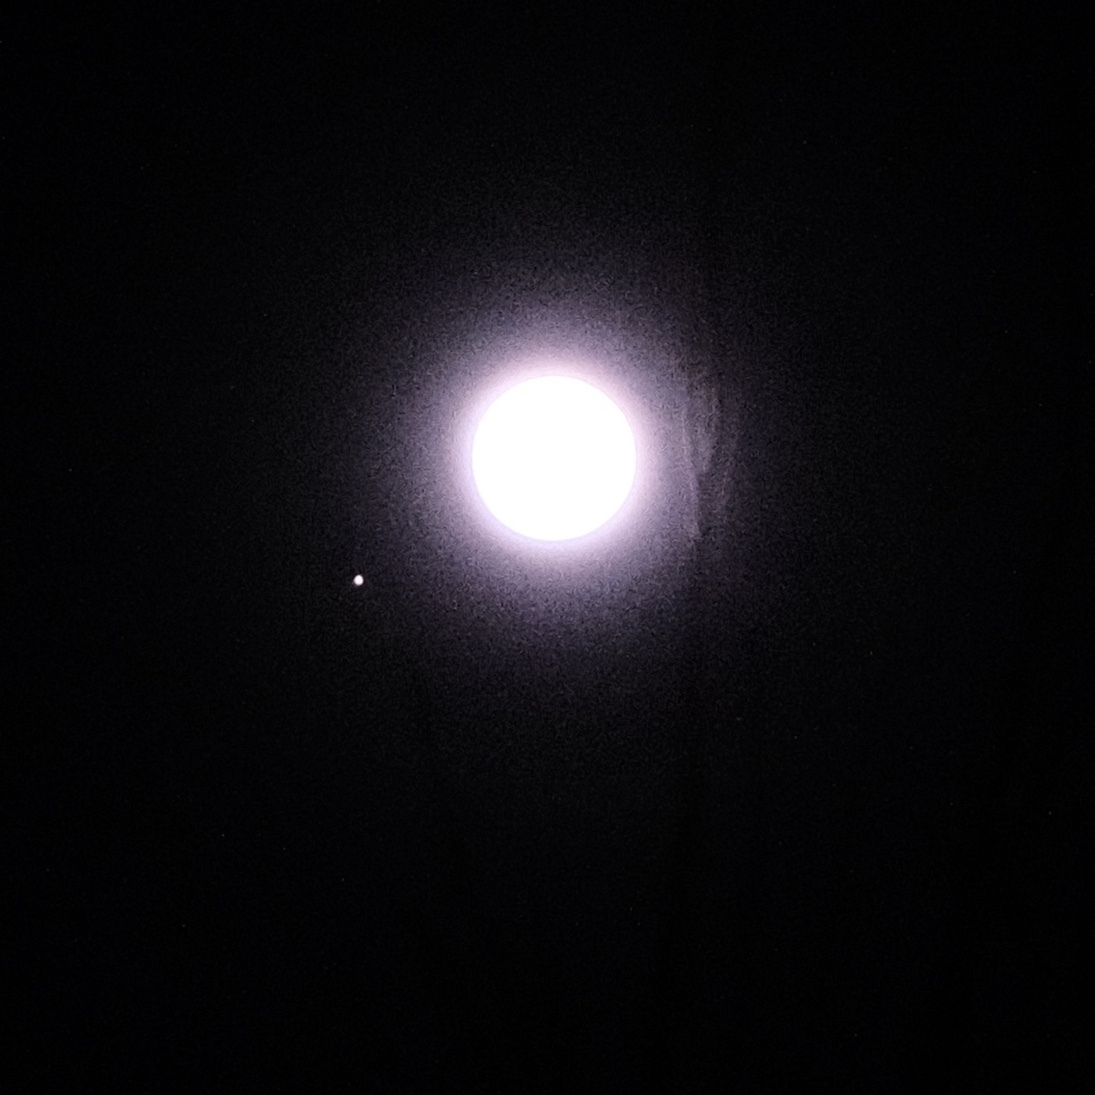 mars and the moon in a dark sky. mars looks like a star to the bottom left of the full extremely bright moon